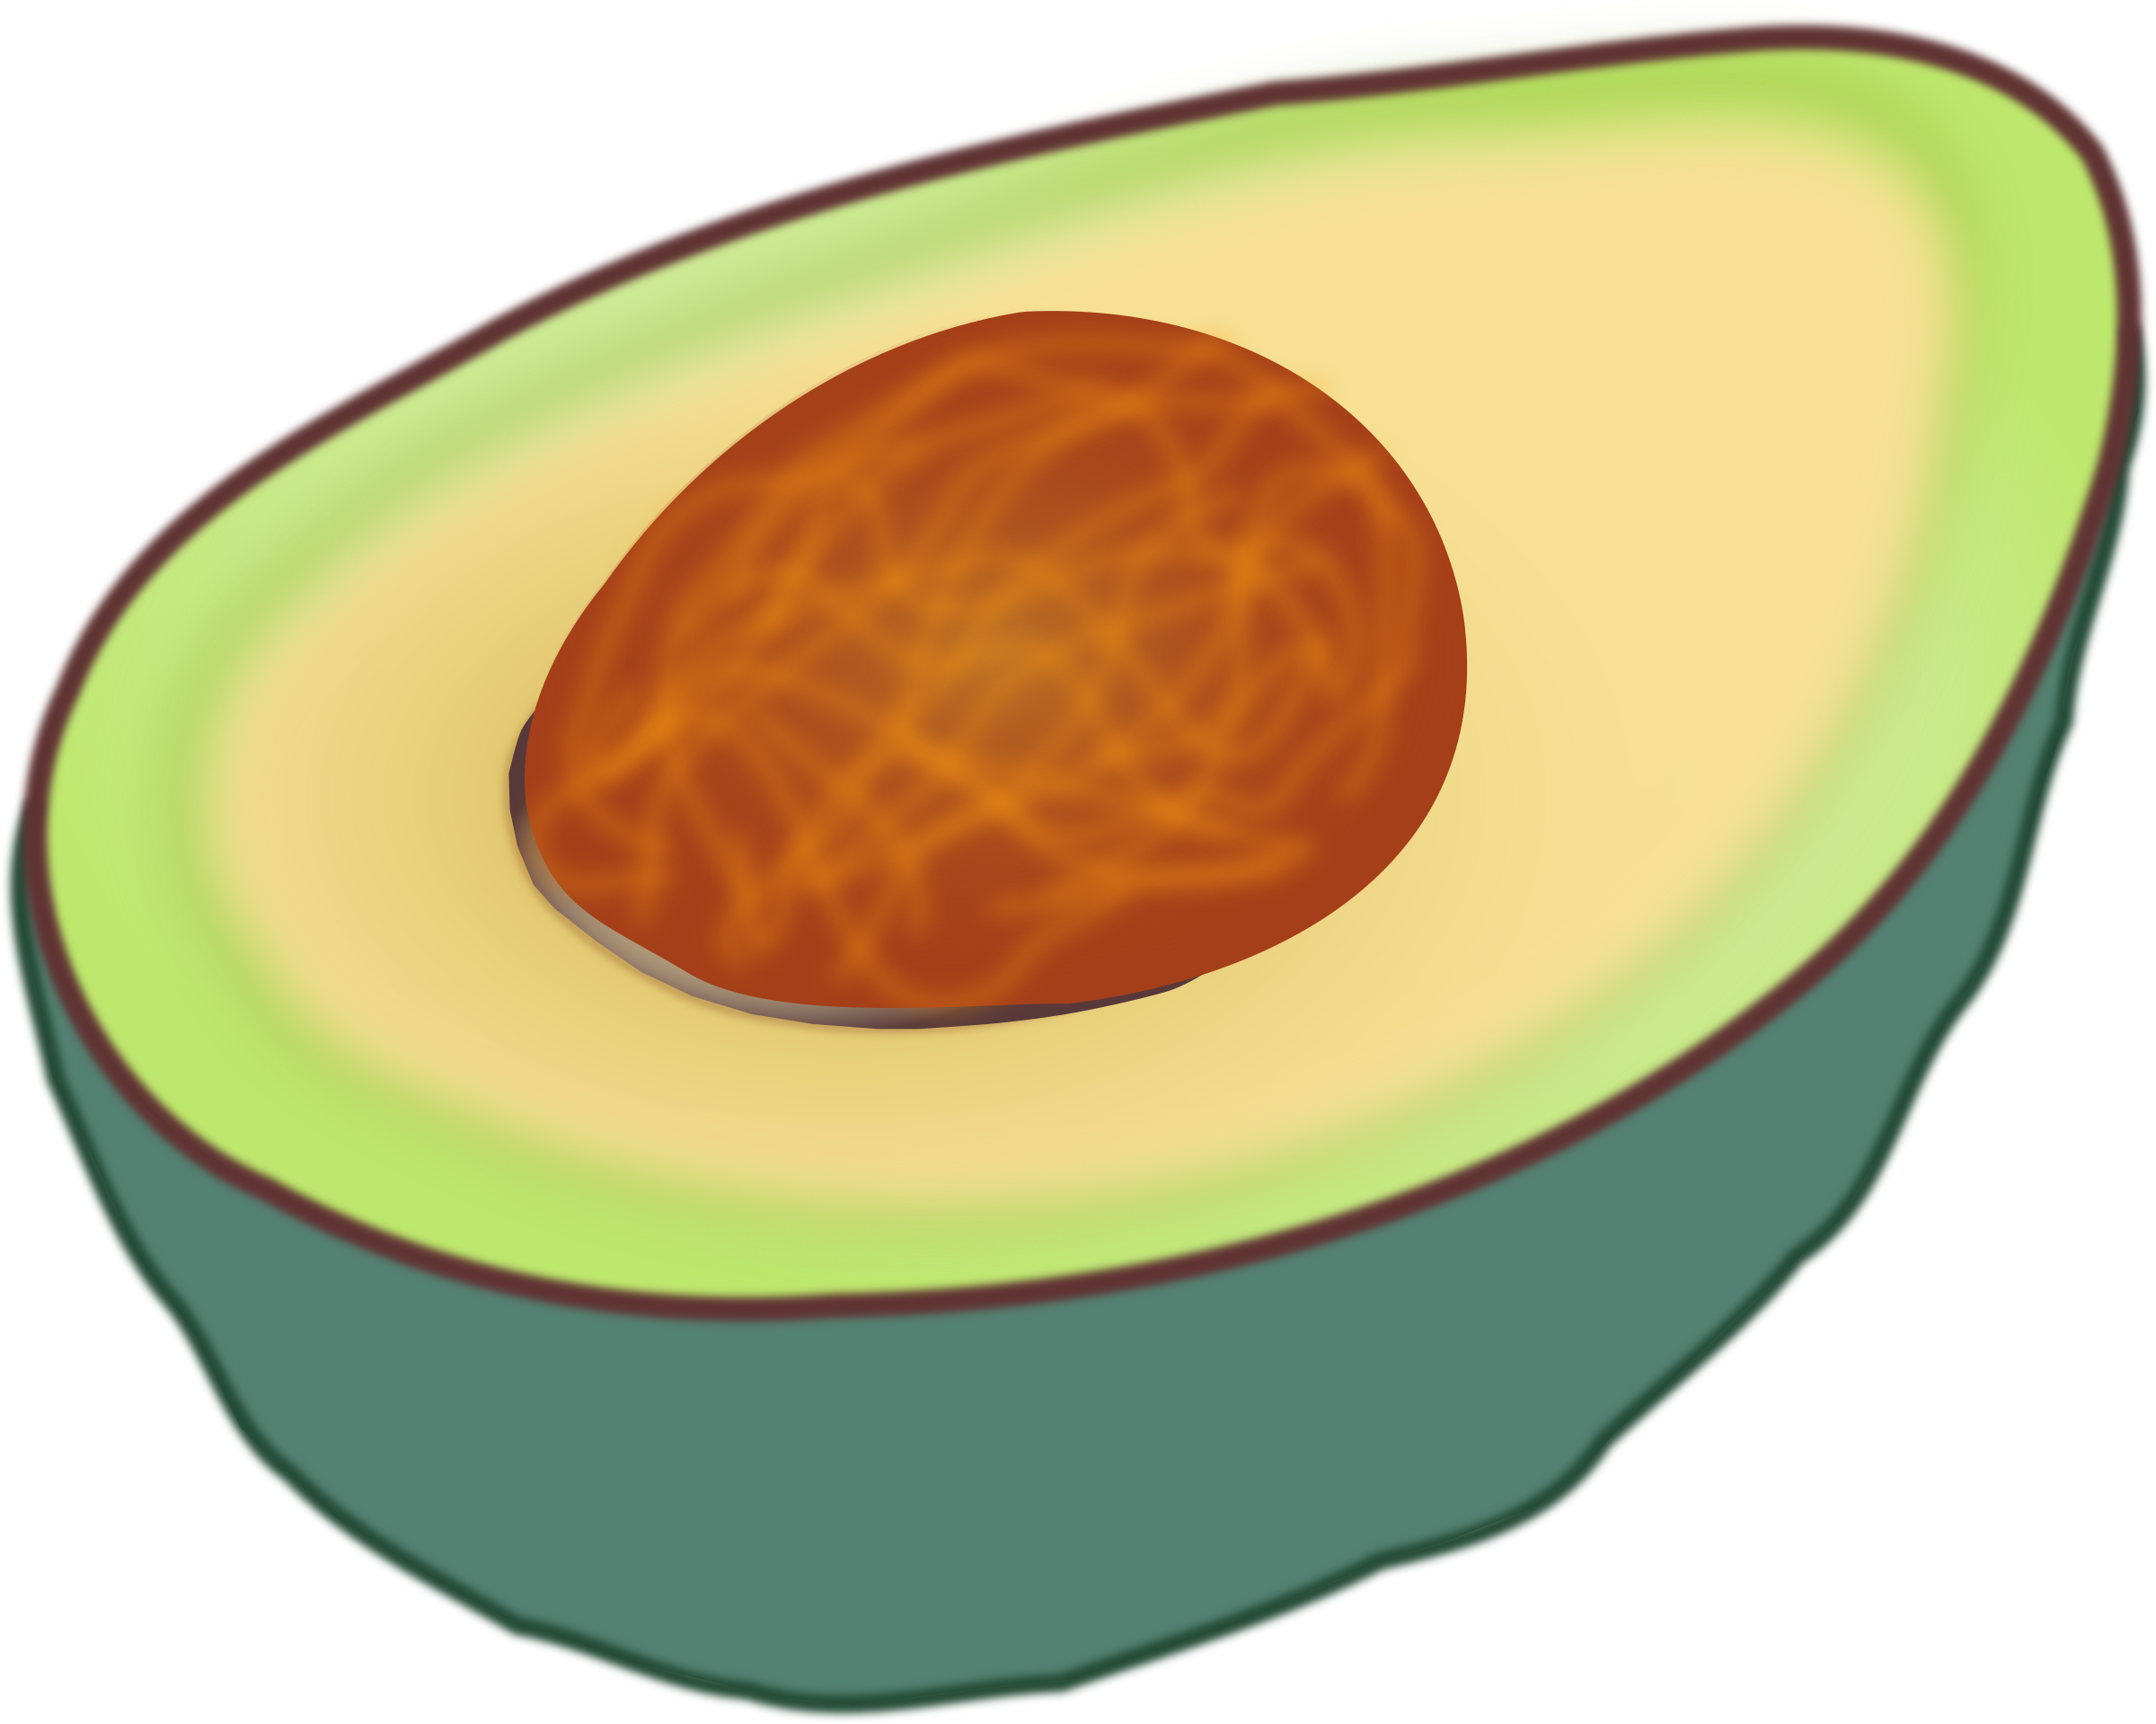 A Half Of An Avocado With A Brown Seed Inside